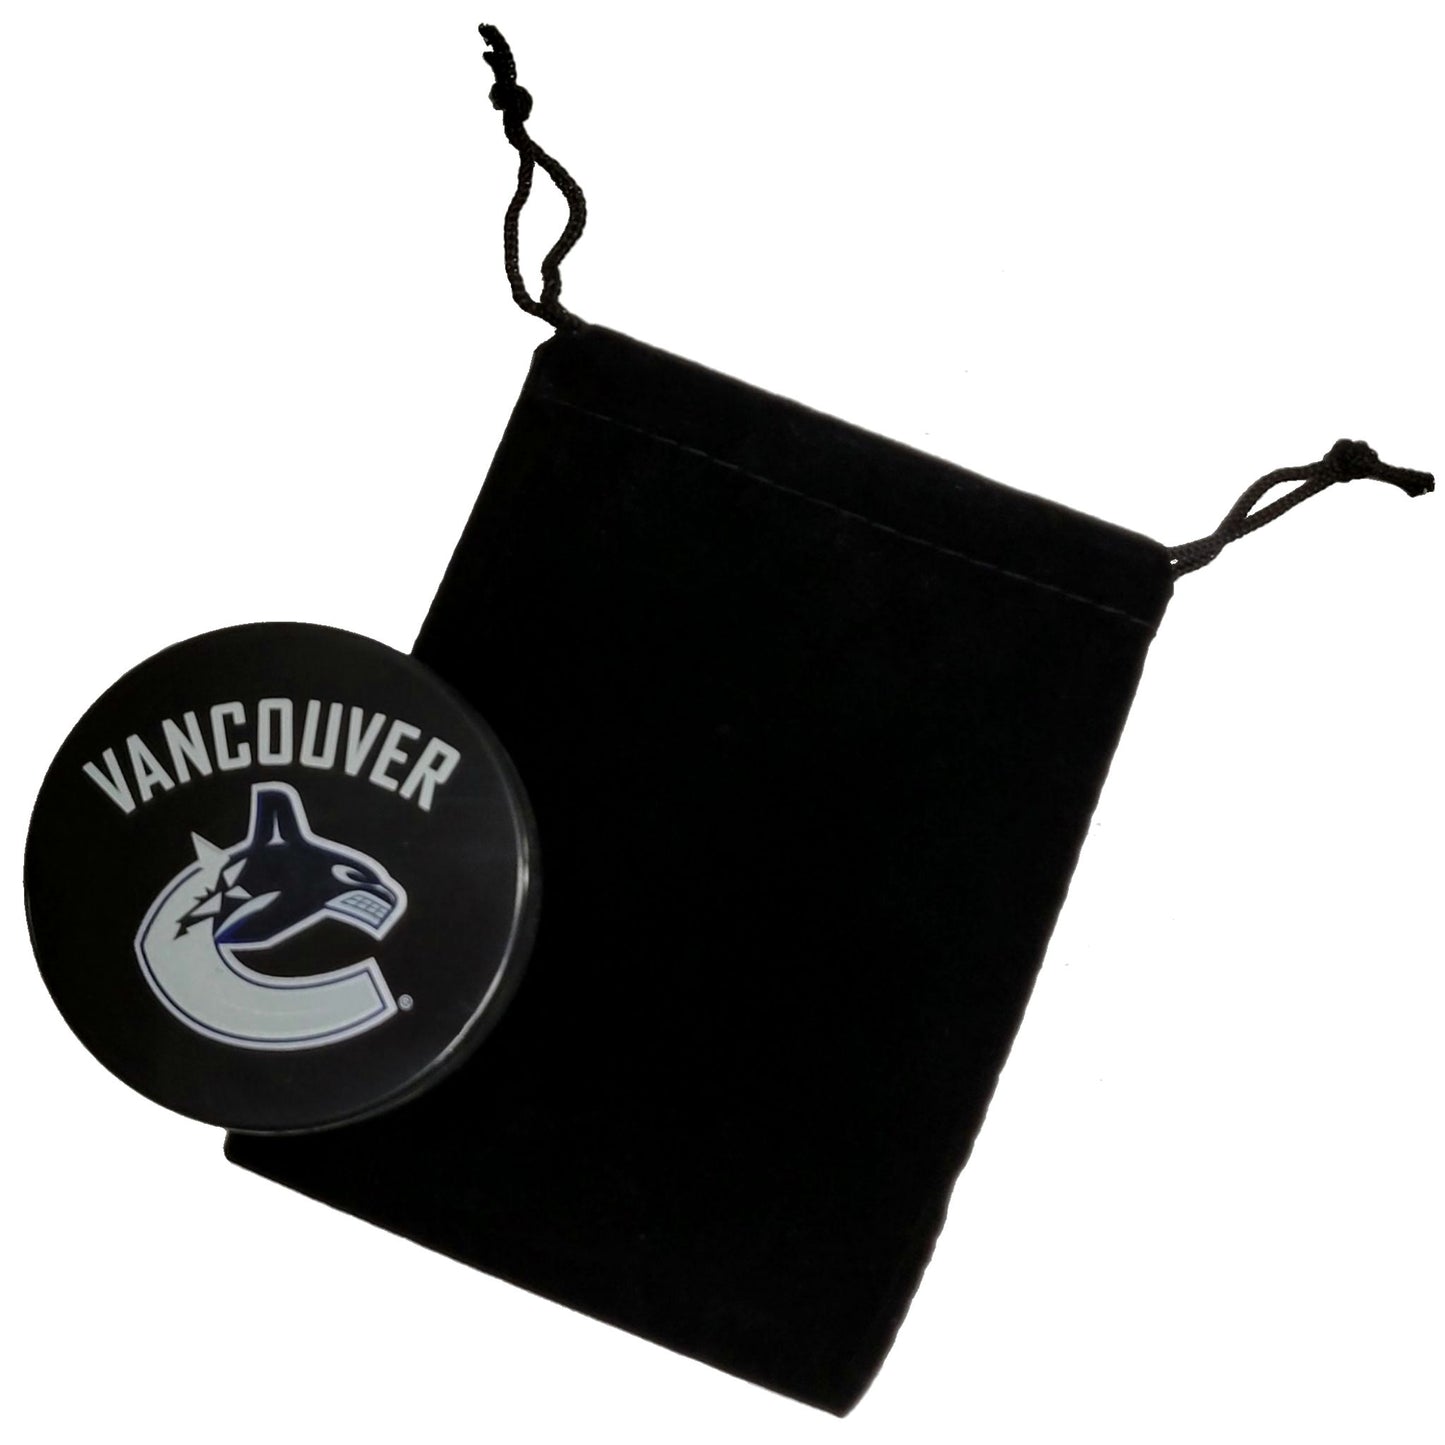 Out Of Print Vancouver Canucks Text Logo Basic Style Collectible Hockey Puck